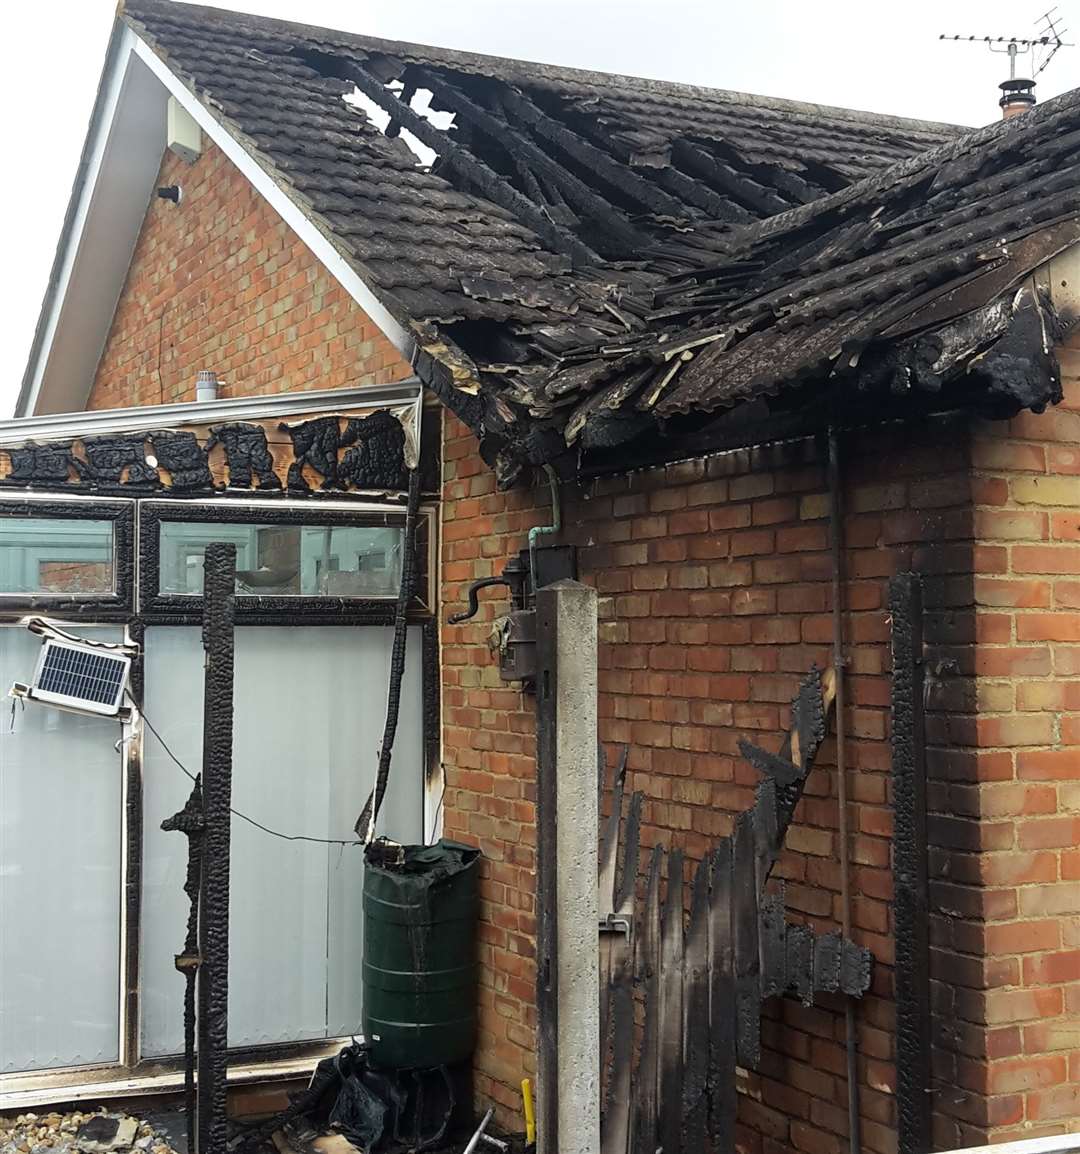 The fire spread from a bin to the fence and then the roof of a bungalow